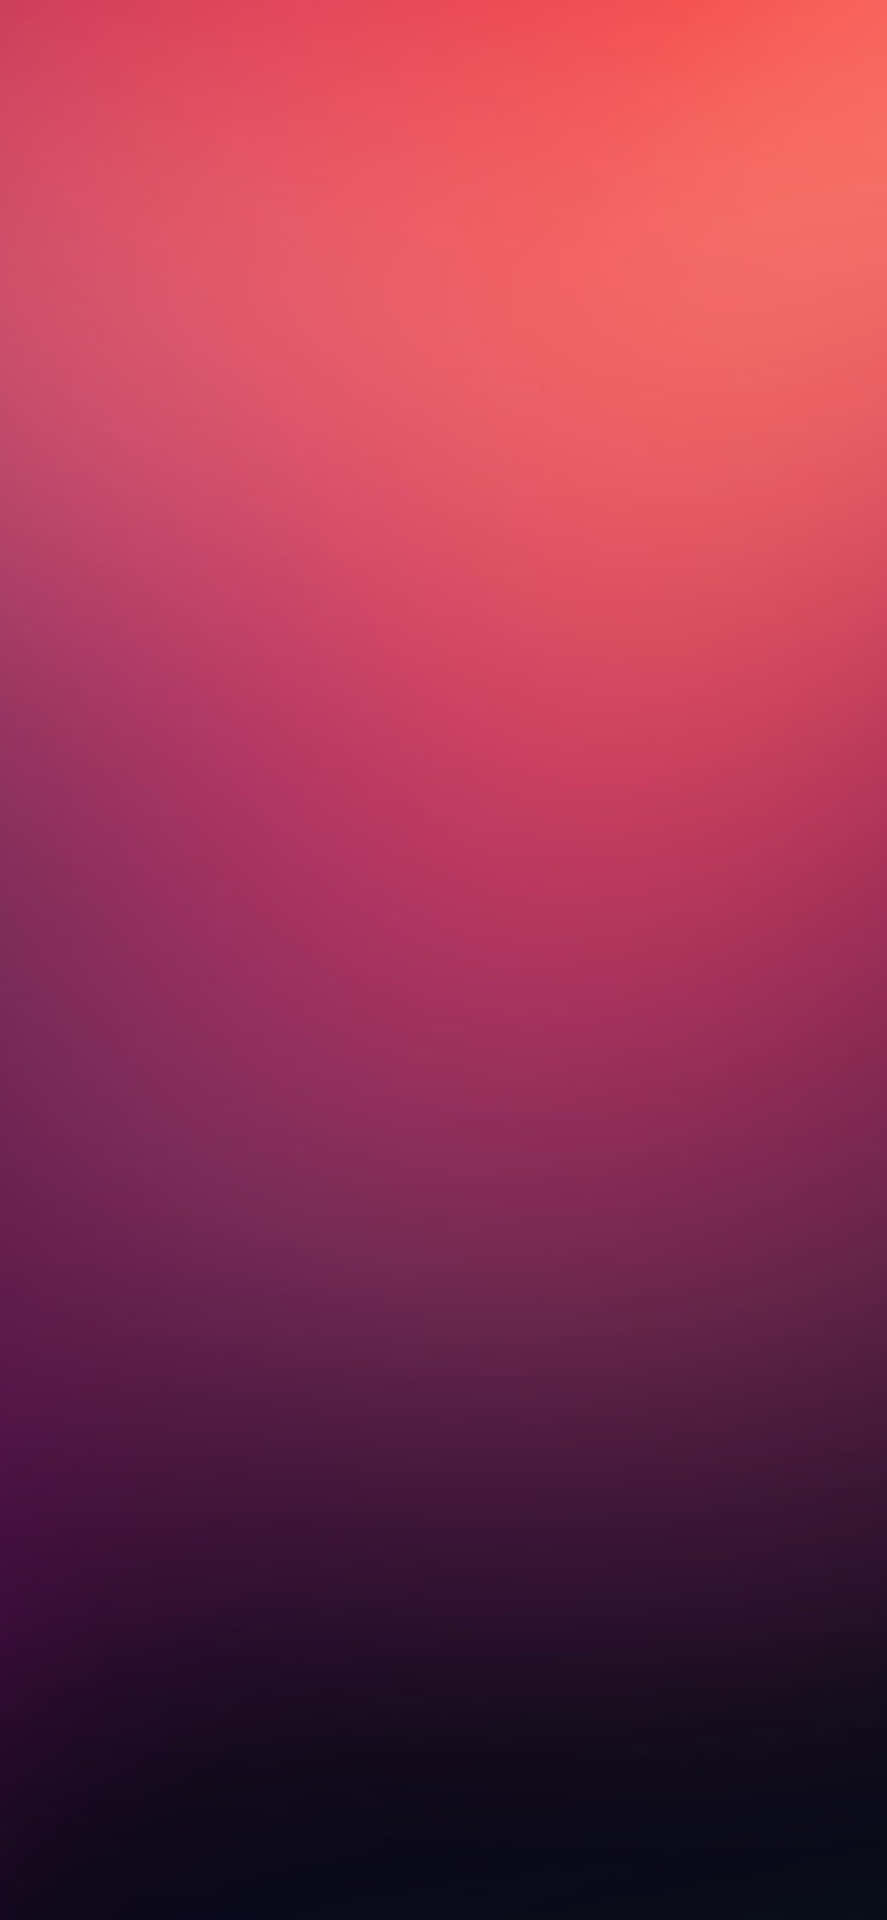 A Purple And Red Abstract Background Wallpaper